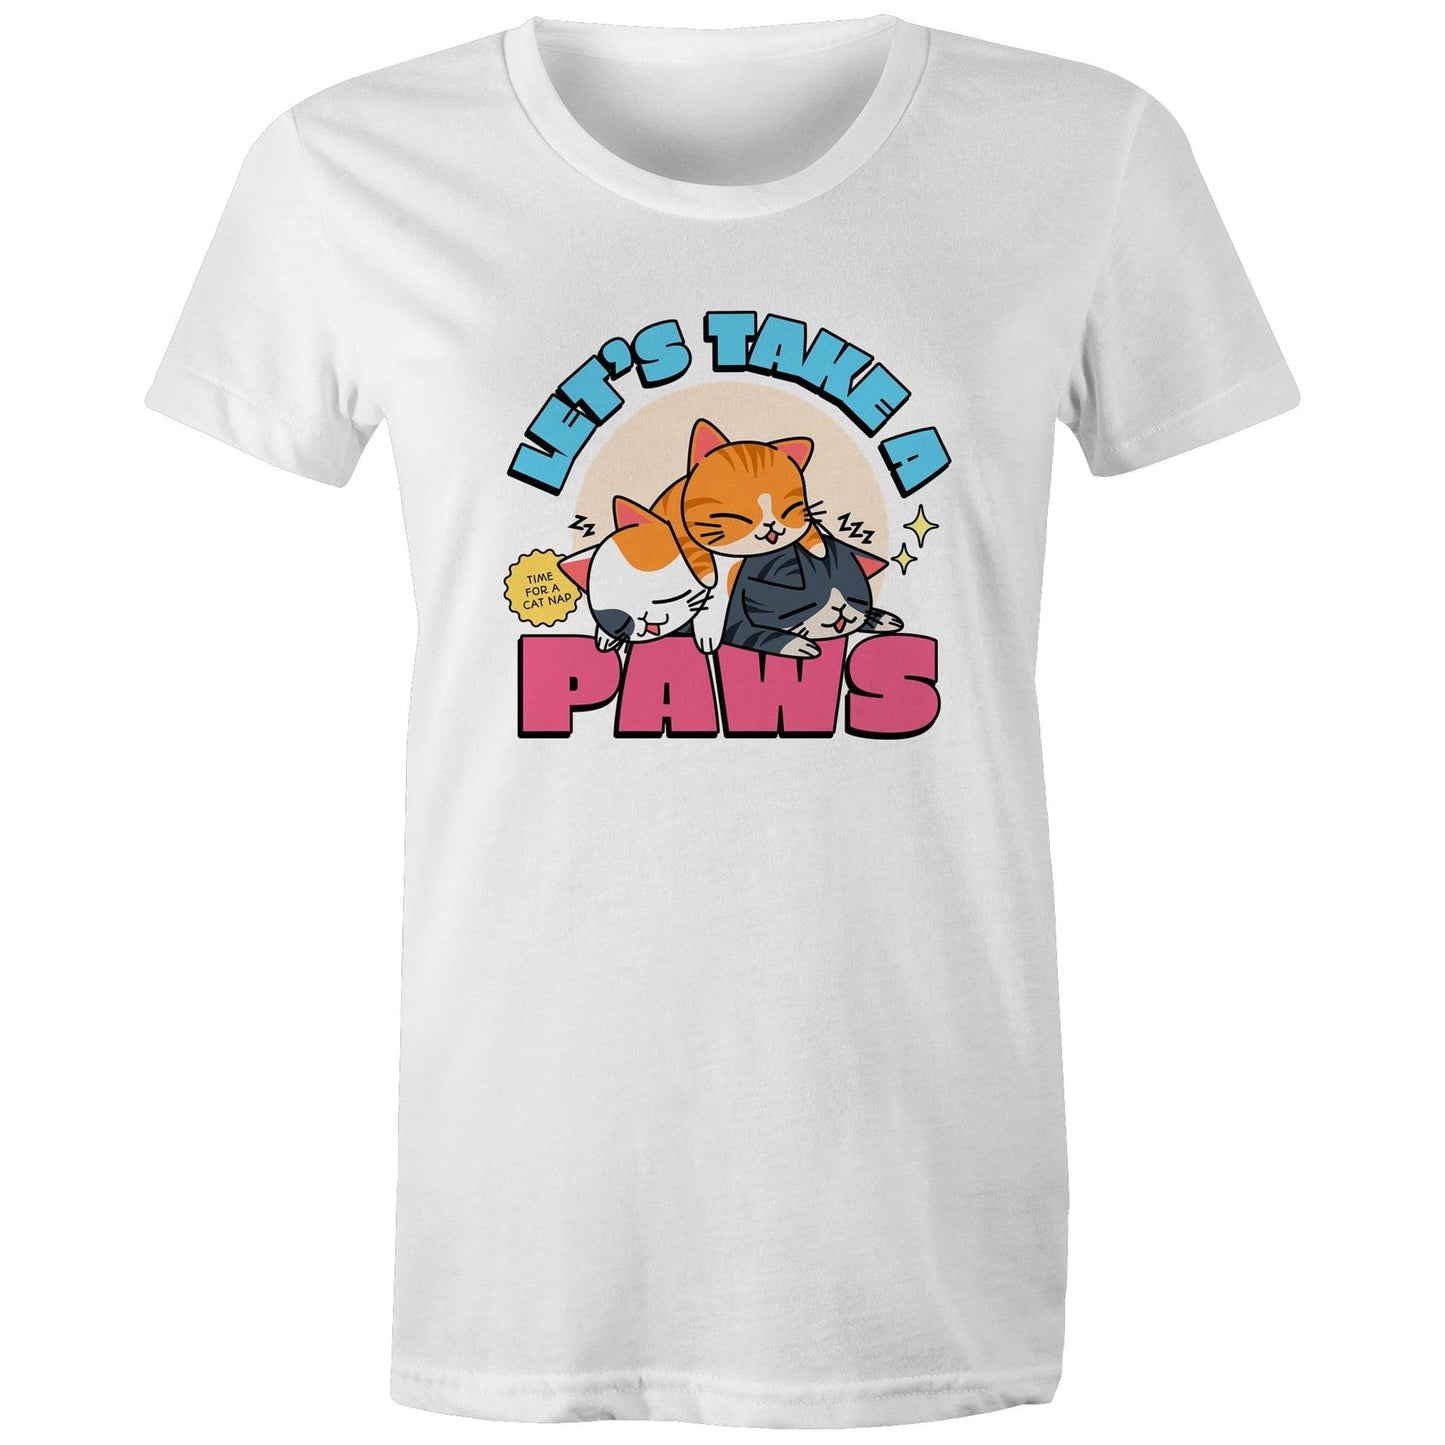 Let's Take A Paws, Time For A Cat Nap - Womens T-shirt White Womens T-shirt animal